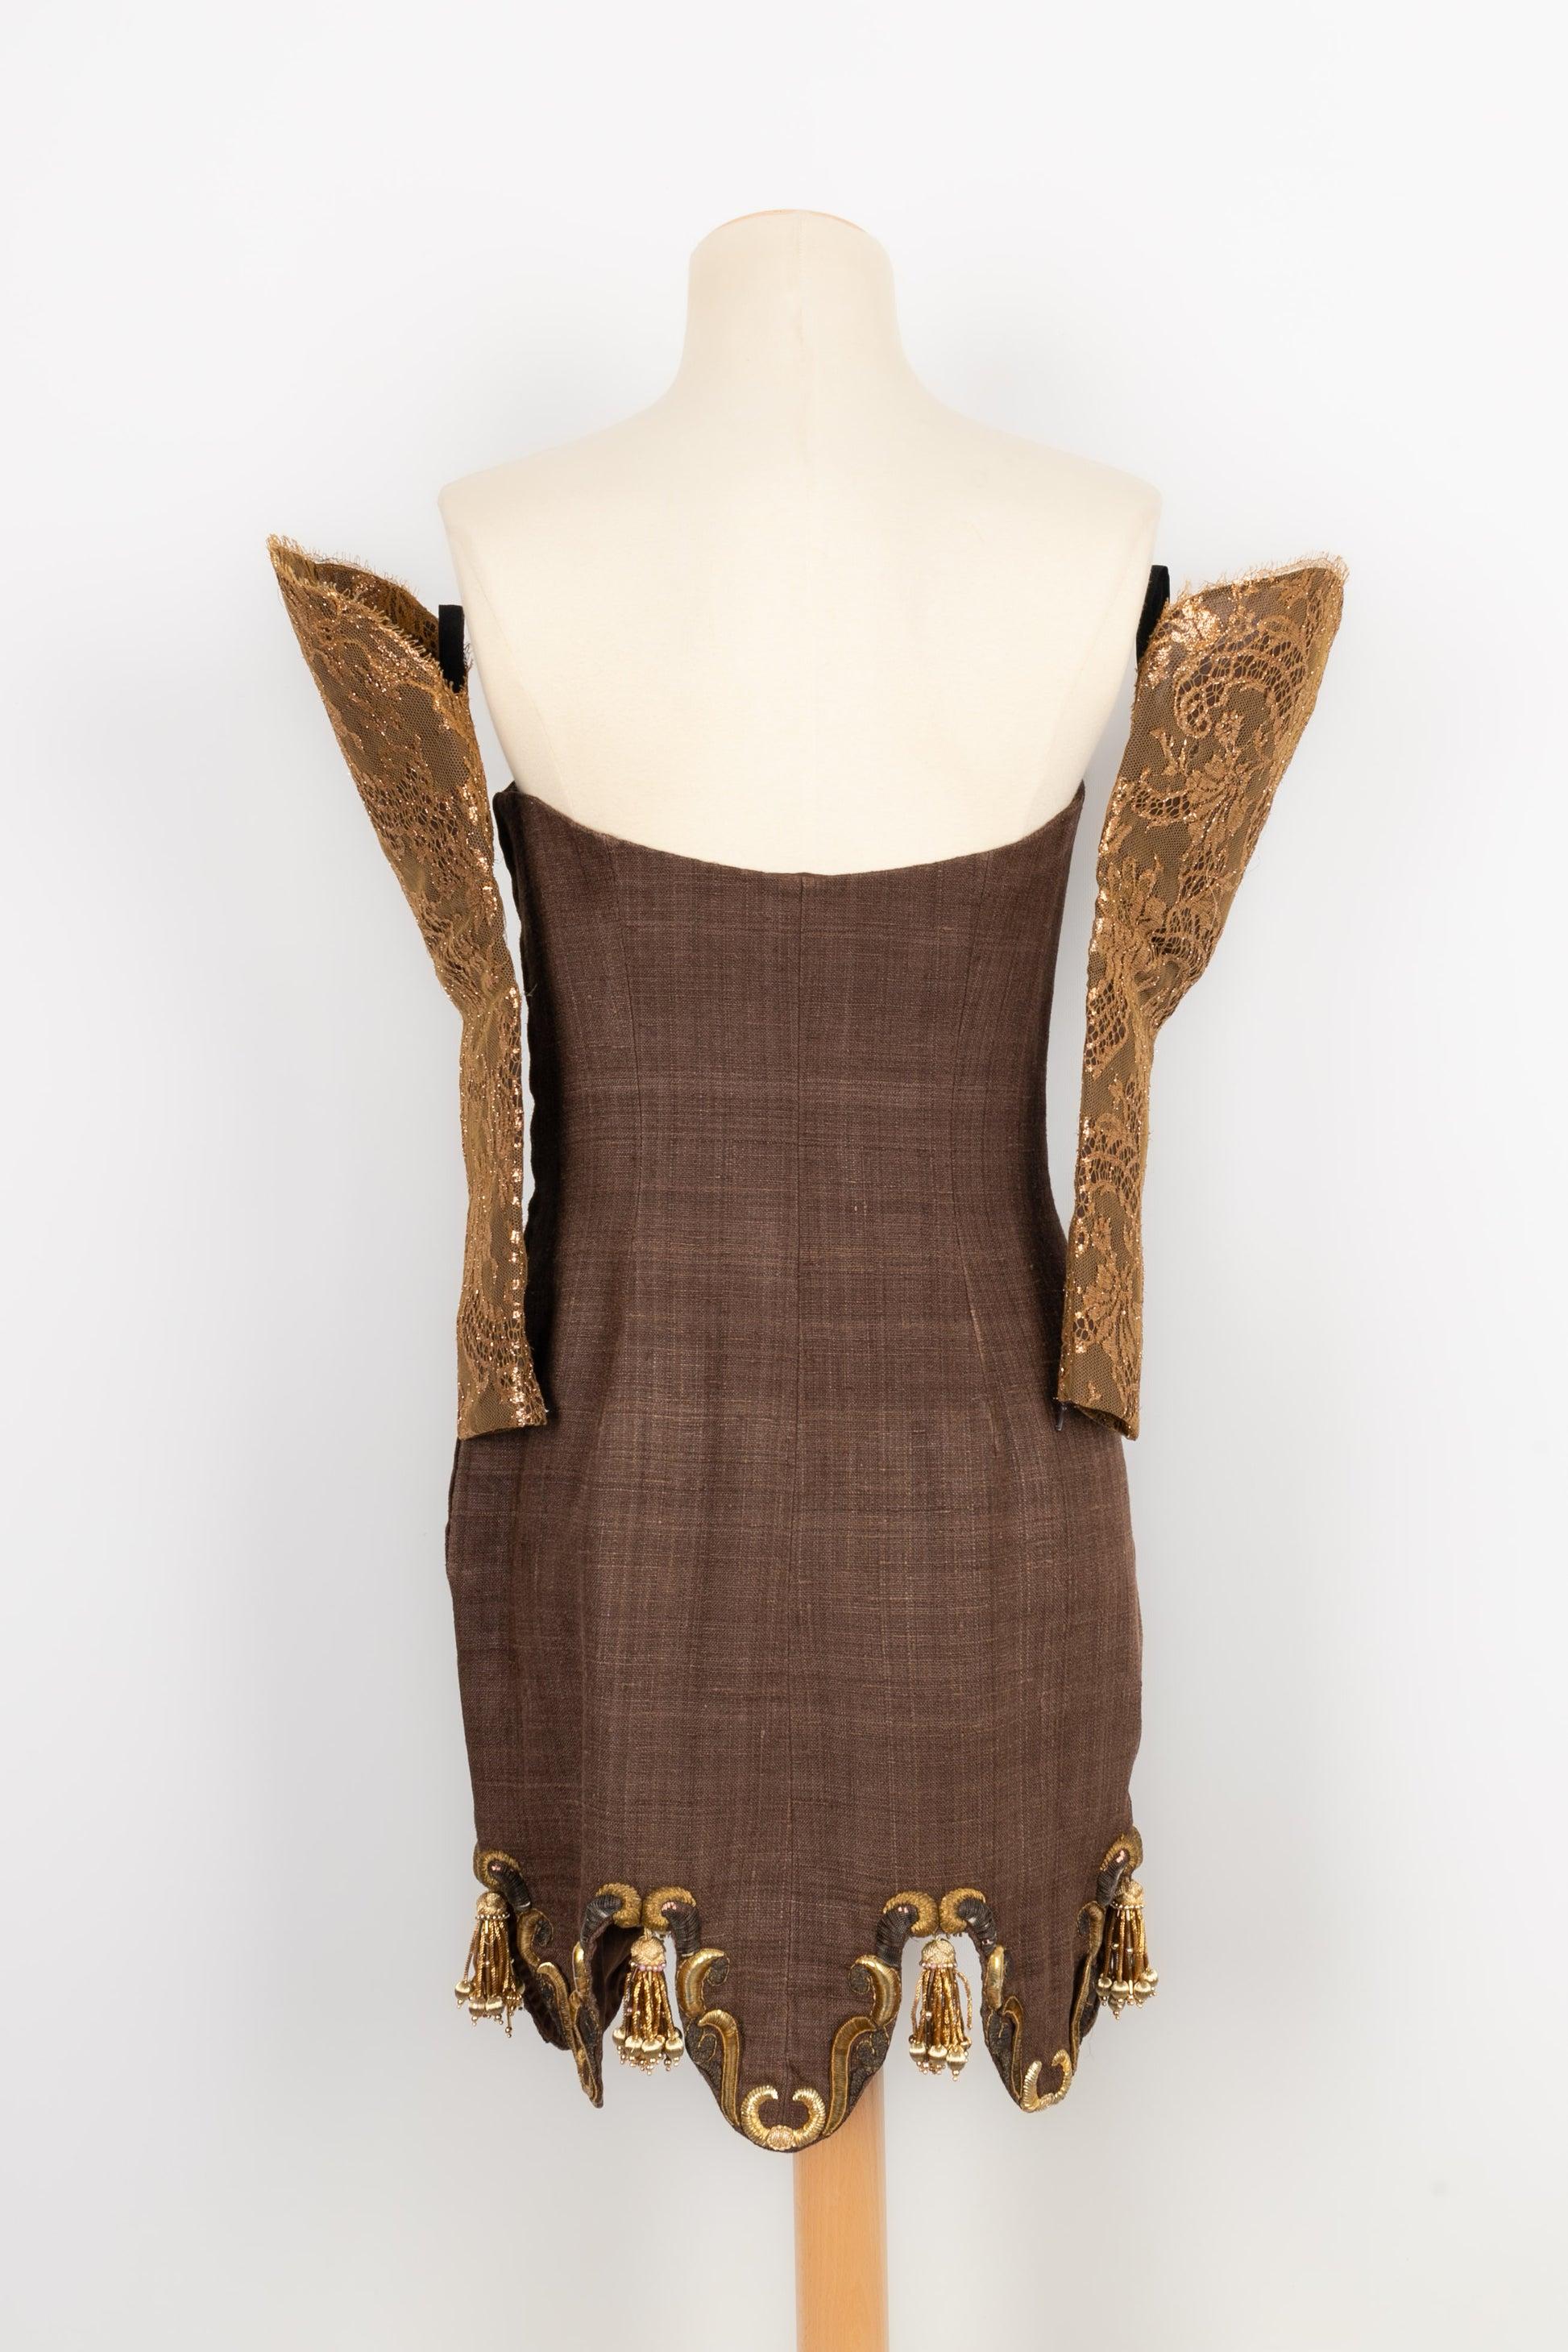 Women's Christian Lacroix Robe Haute Couture Dress in Brown Linen and Golden Embroidery For Sale